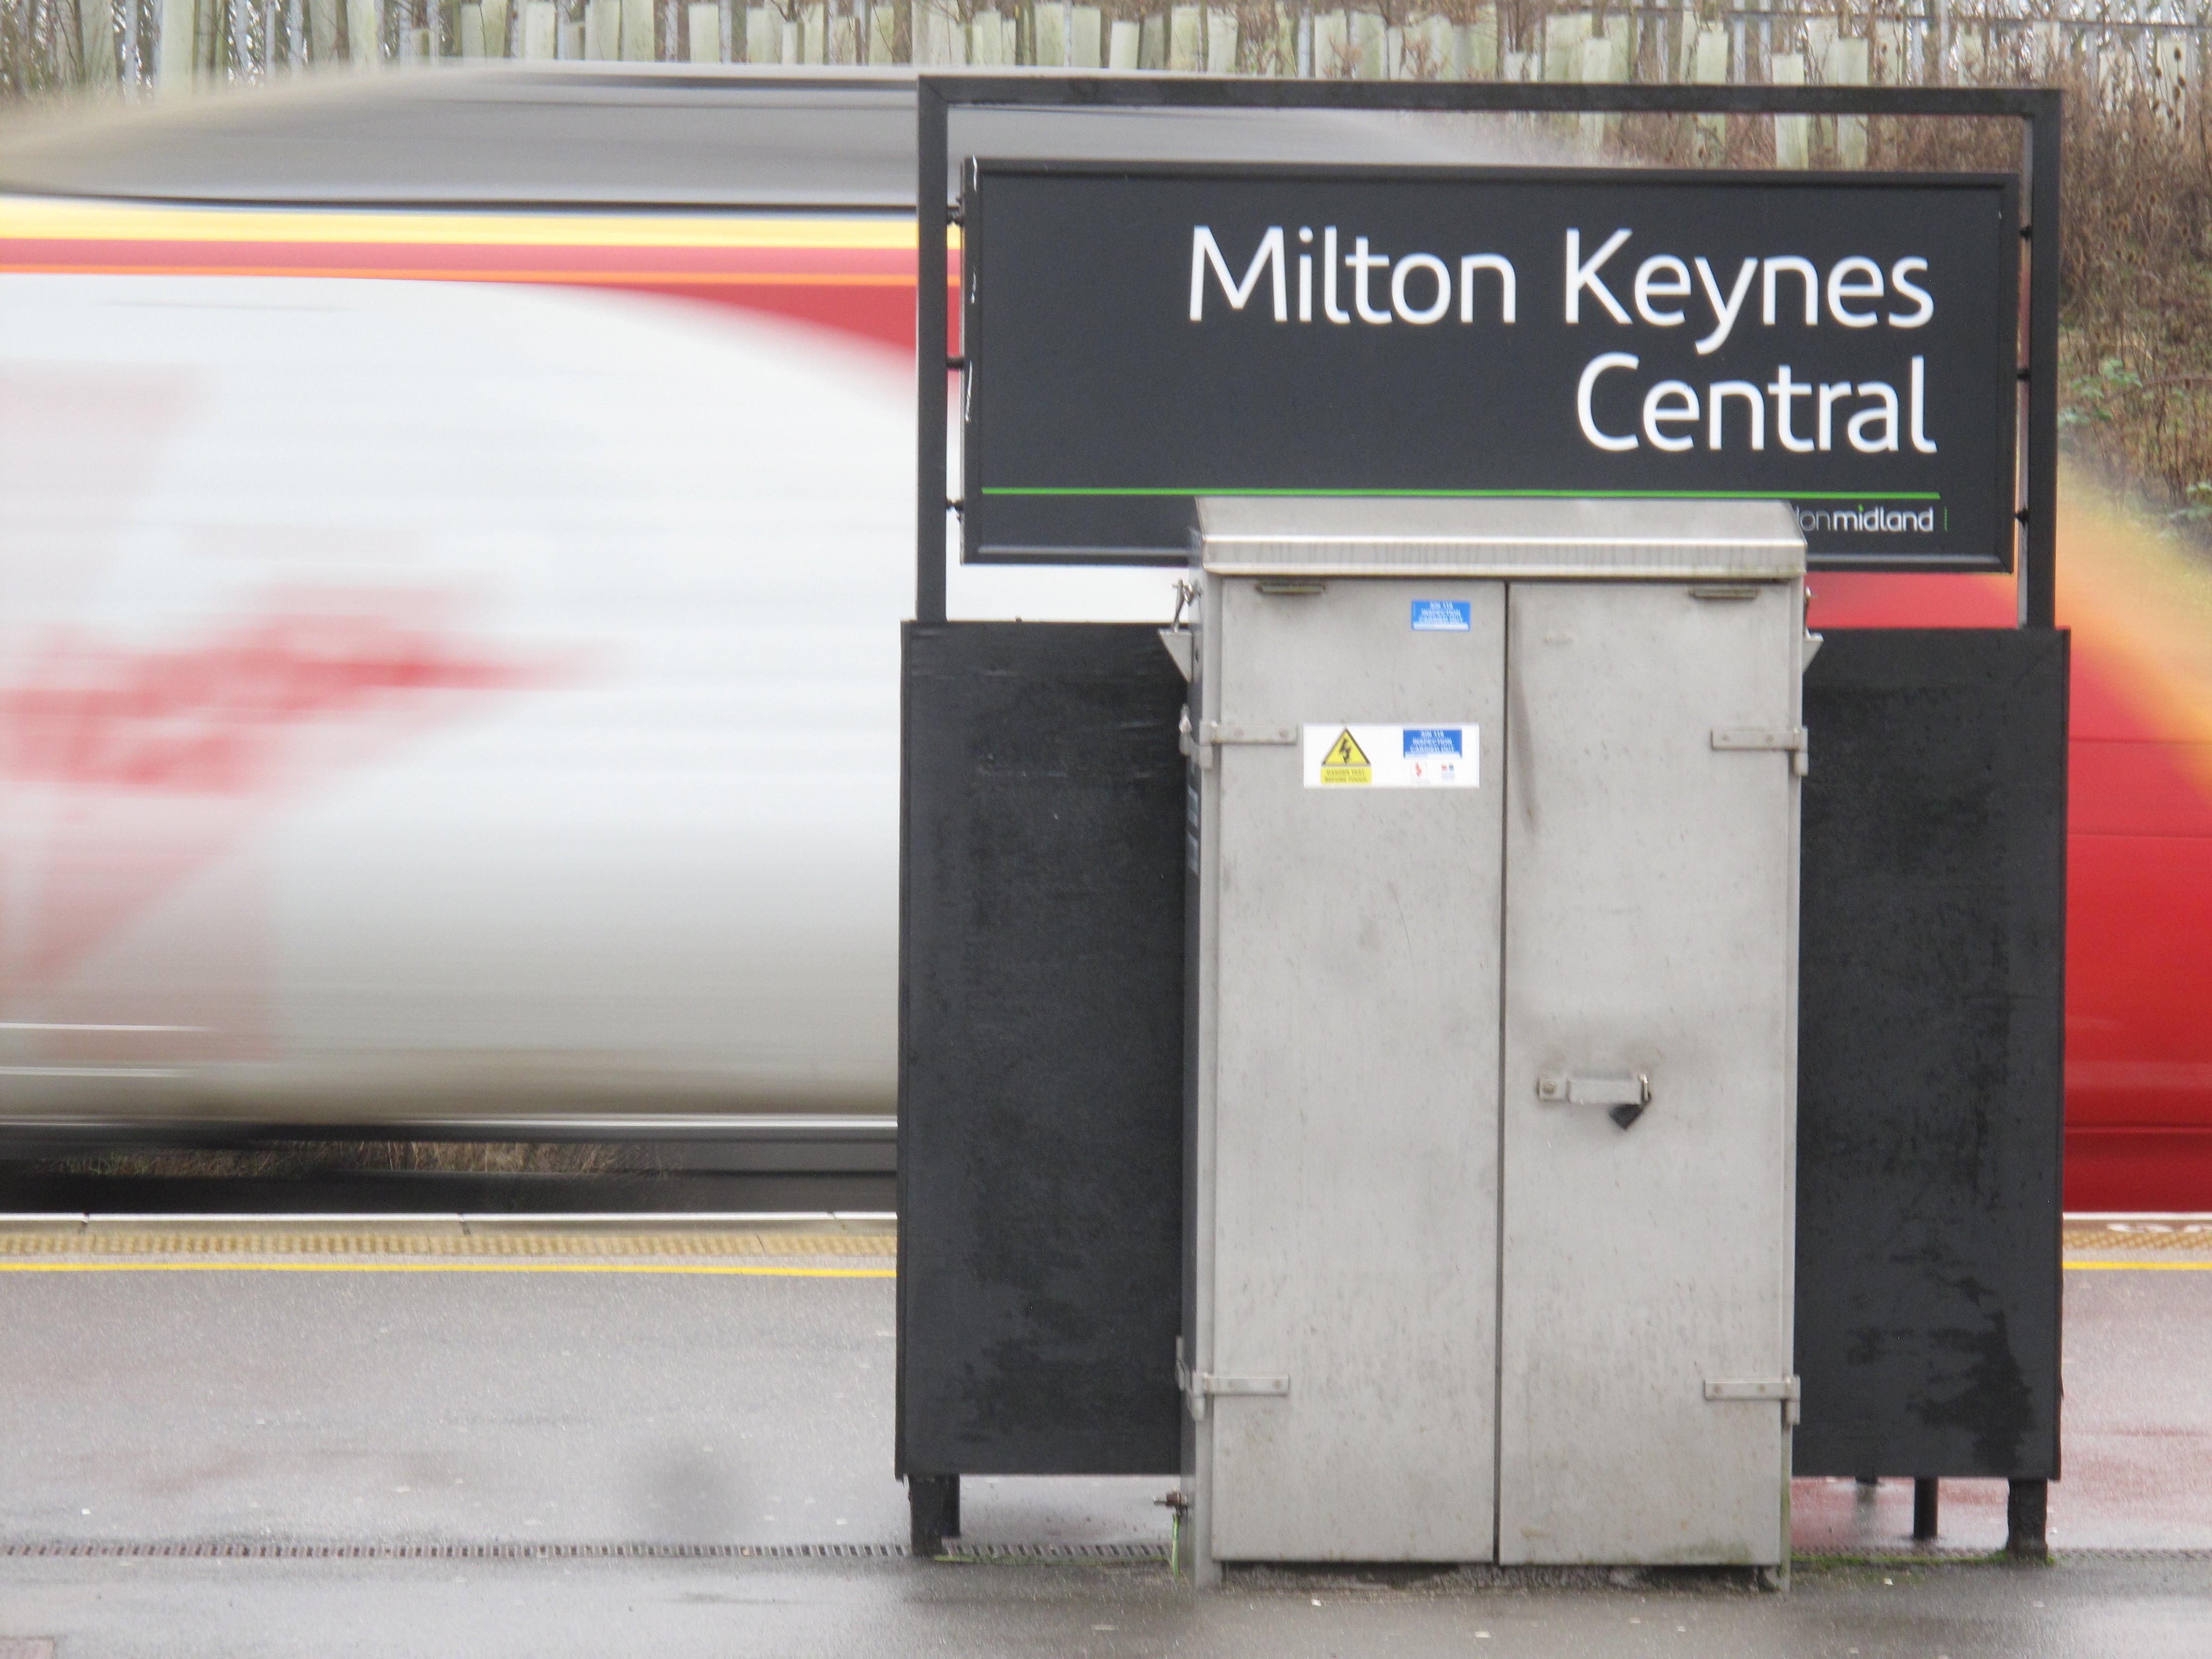 Fare’s fair? Part-time commuters using Milton Keynes Central stand to benefit from flexi season tickets